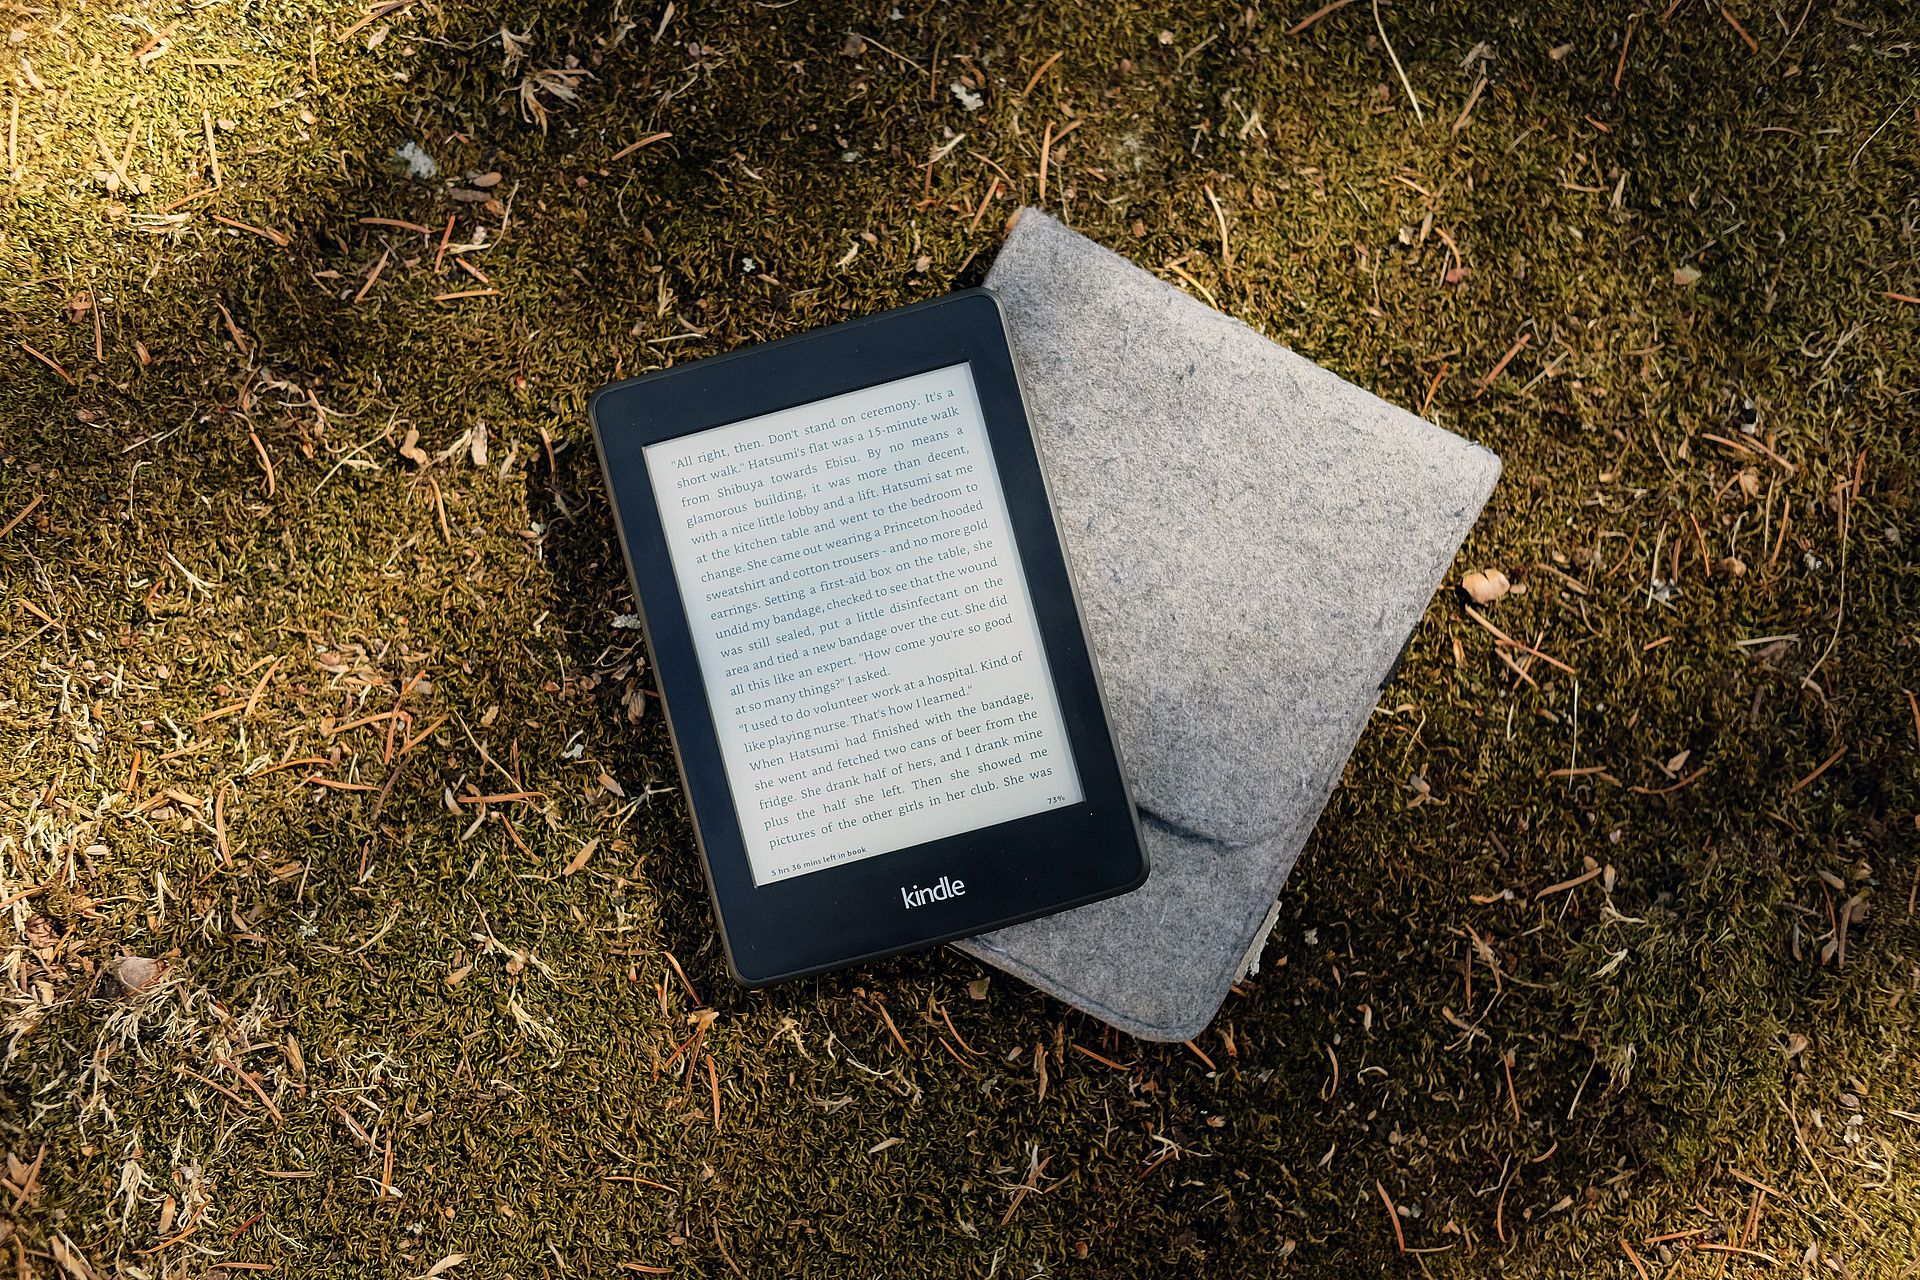 Amazon Stuff Your Kindle Day: How to get the most out of it